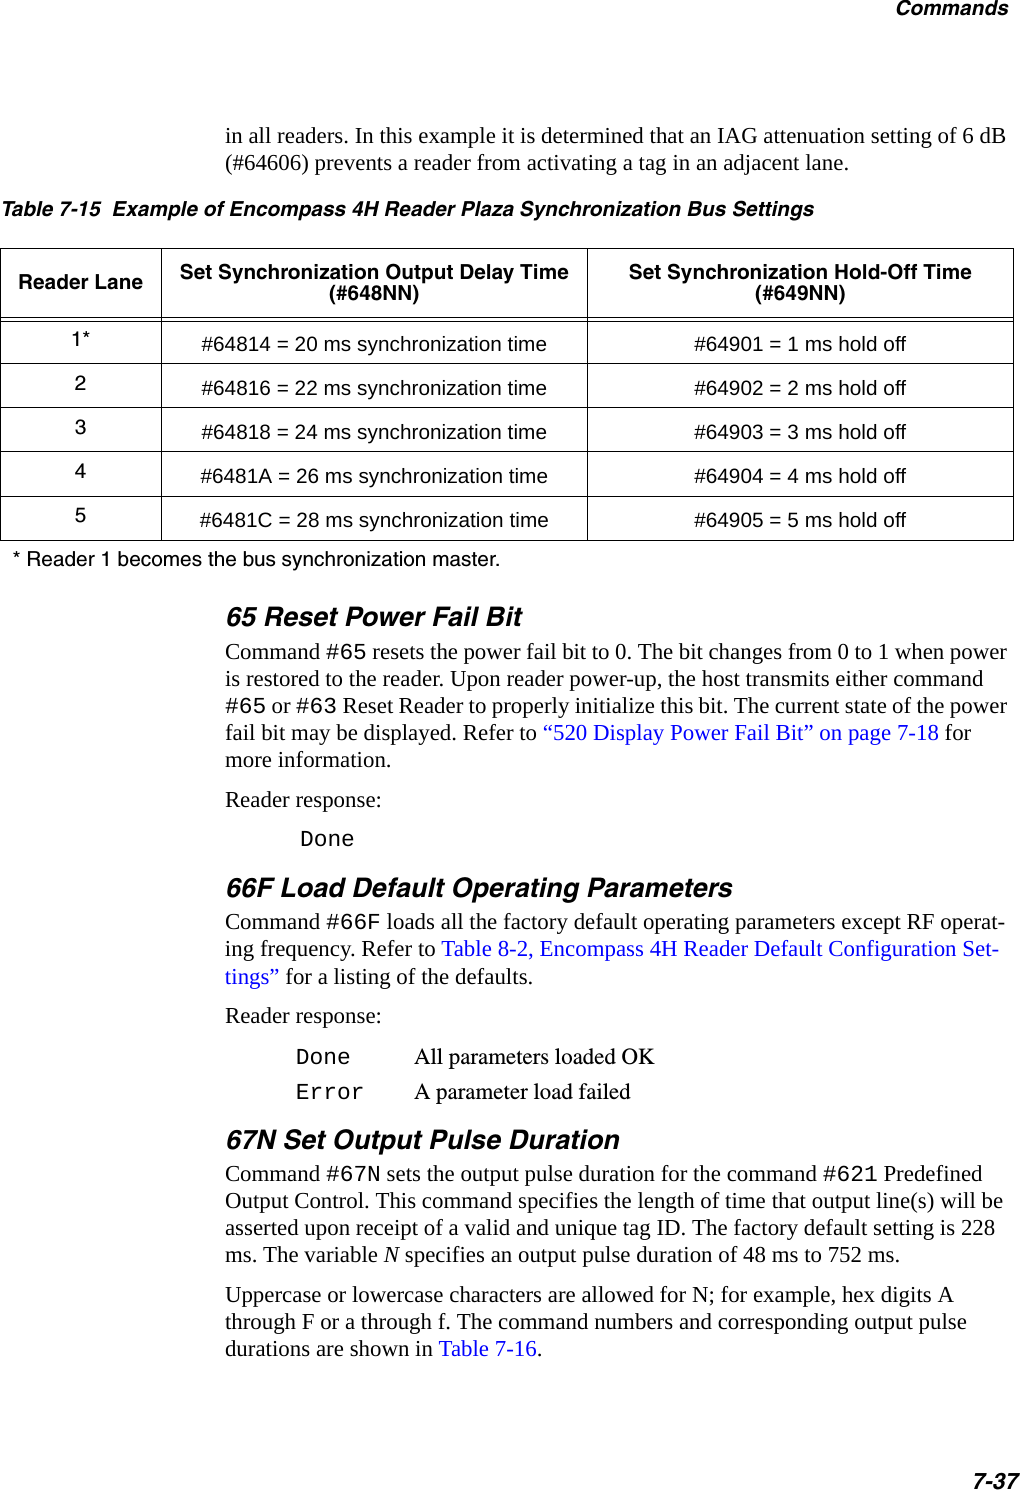 Commands7-37in all readers. In this example it is determined that an IAG attenuation setting of 6 dB (#64606) prevents a reader from activating a tag in an adjacent lane.Table 7-15  Example of Encompass 4H Reader Plaza Synchronization Bus SettingsReader Lane Set Synchronization Output Delay Time (#648NN)Set Synchronization Hold-Off Time (#649NN)1* #64814 = 20 ms synchronization time #64901 = 1 ms hold off2#64816 = 22 ms synchronization time #64902 = 2 ms hold off3#64818 = 24 ms synchronization time #64903 = 3 ms hold off4#6481A = 26 ms synchronization time #64904 = 4 ms hold off5#6481C = 28 ms synchronization time #64905 = 5 ms hold off* Reader 1 becomes the bus synchronization master.65 Reset Power Fail BitCommand #65 resets the power fail bit to 0. The bit changes from 0 to 1 when power is restored to the reader. Upon reader power-up, the host transmits either command #65 or #63 Reset Reader to properly initialize this bit. The current state of the power fail bit may be displayed. Refer to “520 Display Power Fail Bit” on page 7-18 for more information.Reader response:Done66F Load Default Operating ParametersCommand #66F loads all the factory default operating parameters except RF operat-ing frequency. Refer to Table 8-2, Encompass 4H Reader Default Configuration Set-tings” for a listing of the defaults.Reader response:Done All parameters loaded OKError A parameter load failed67N Set Output Pulse DurationCommand #67N sets the output pulse duration for the command #621 Predefined Output Control. This command specifies the length of time that output line(s) will be asserted upon receipt of a valid and unique tag ID. The factory default setting is 228 ms. The variable N specifies an output pulse duration of 48 ms to 752 ms.Uppercase or lowercase characters are allowed for N; for example, hex digits A through F or a through f. The command numbers and corresponding output pulse durations are shown in Table 7-16.